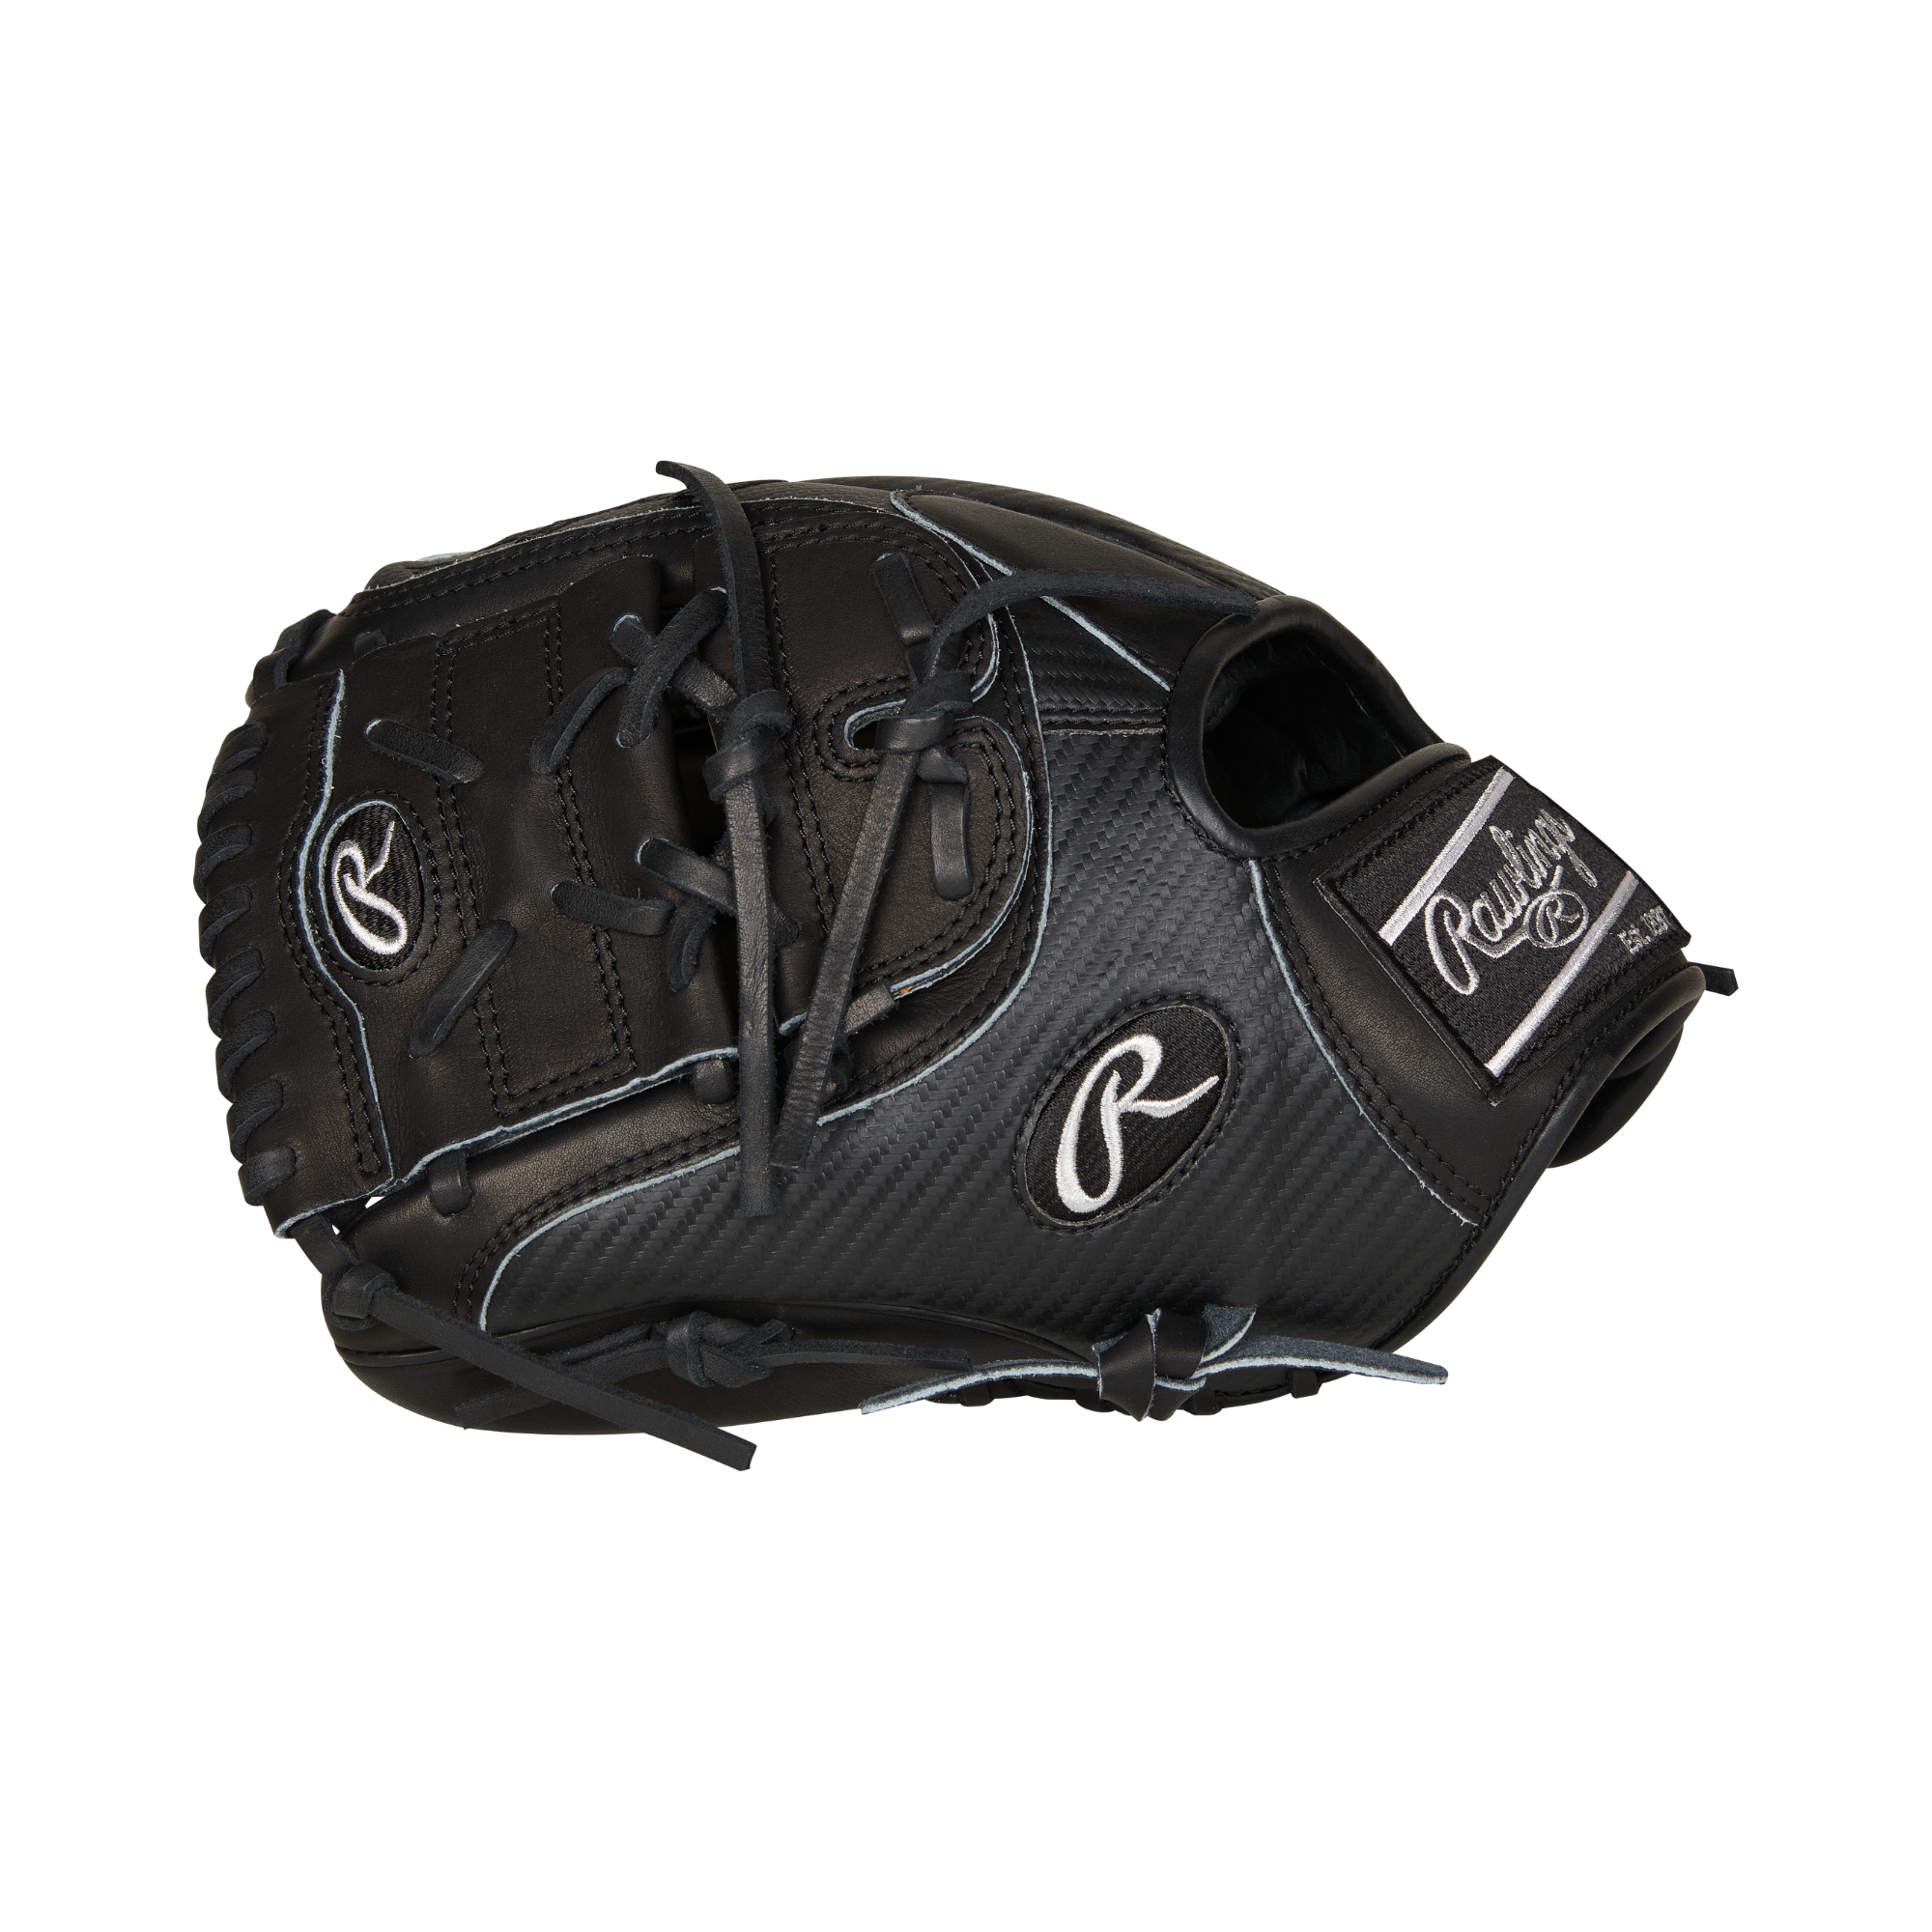 Rawlings Heart of the Hide Hyper Shell Infield/Pitchers Glove Black 11.75 LHT